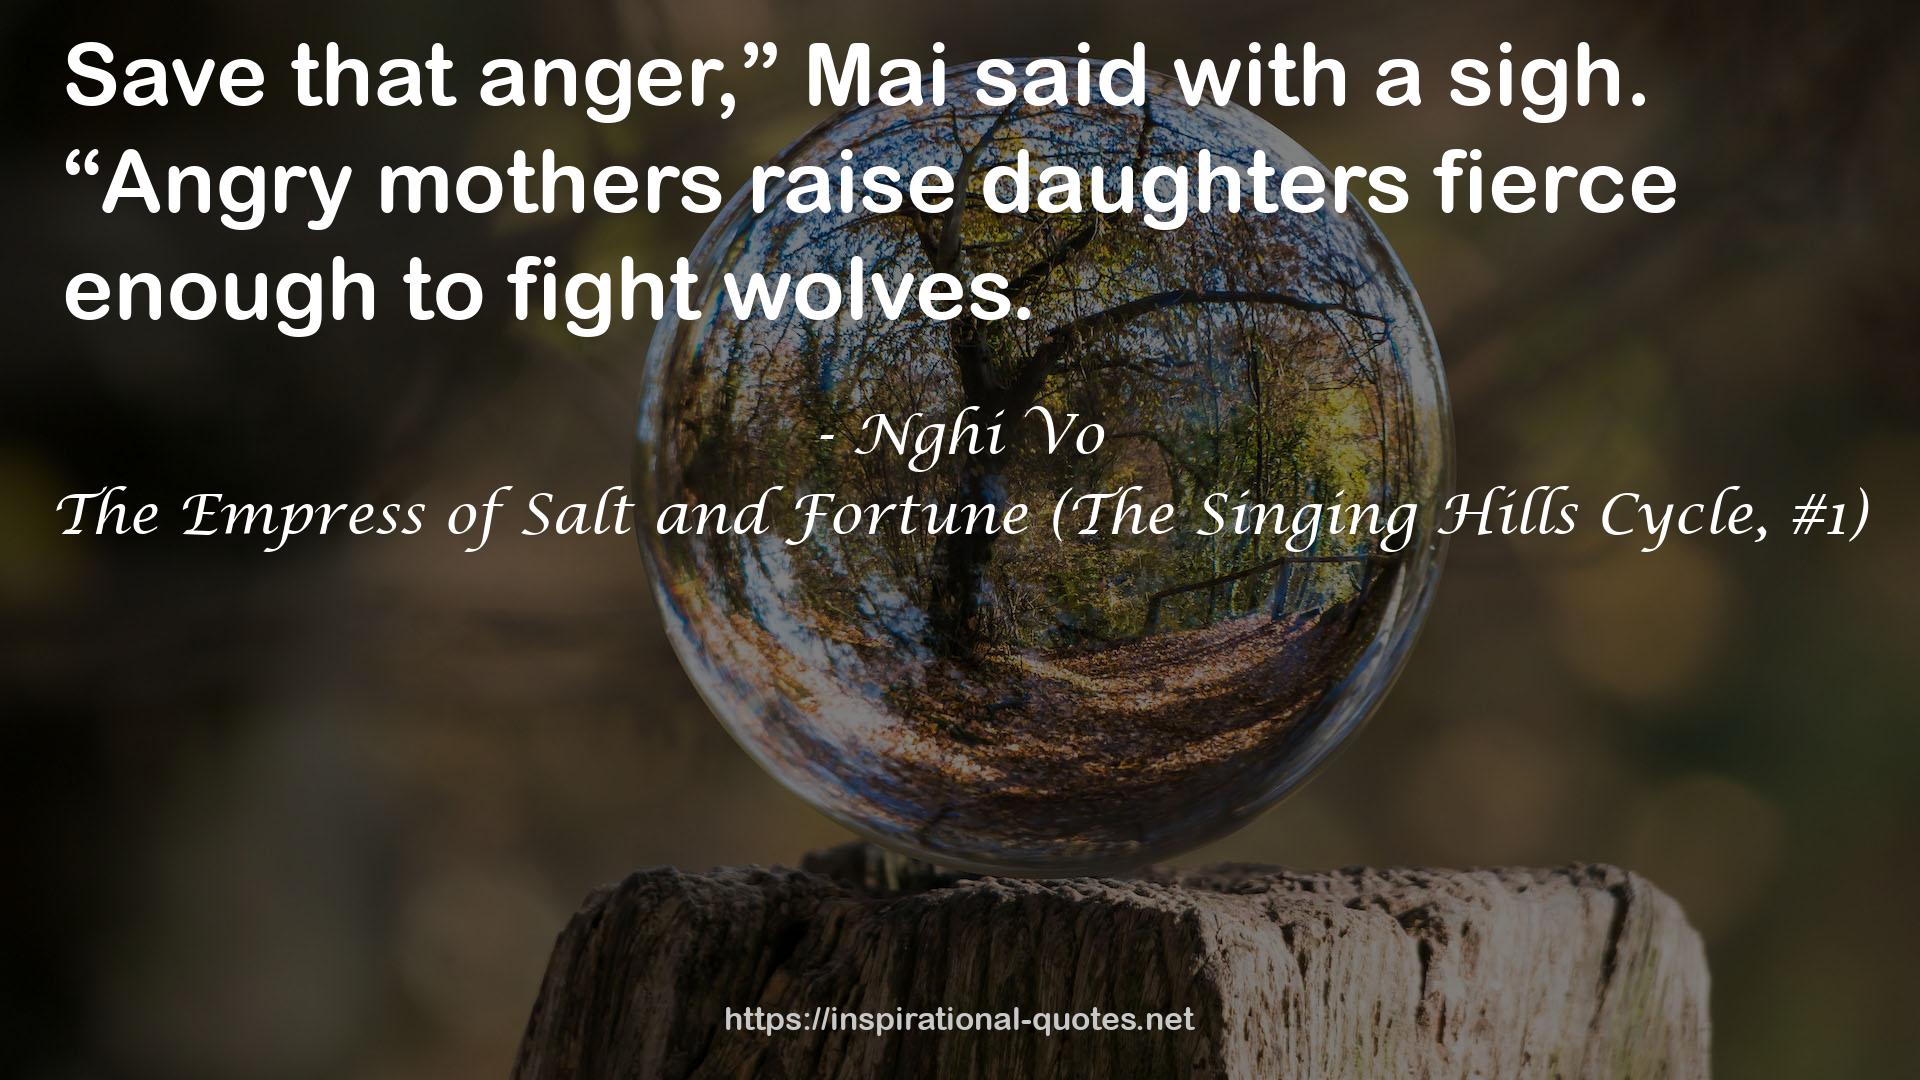 The Empress of Salt and Fortune (The Singing Hills Cycle, #1) QUOTES